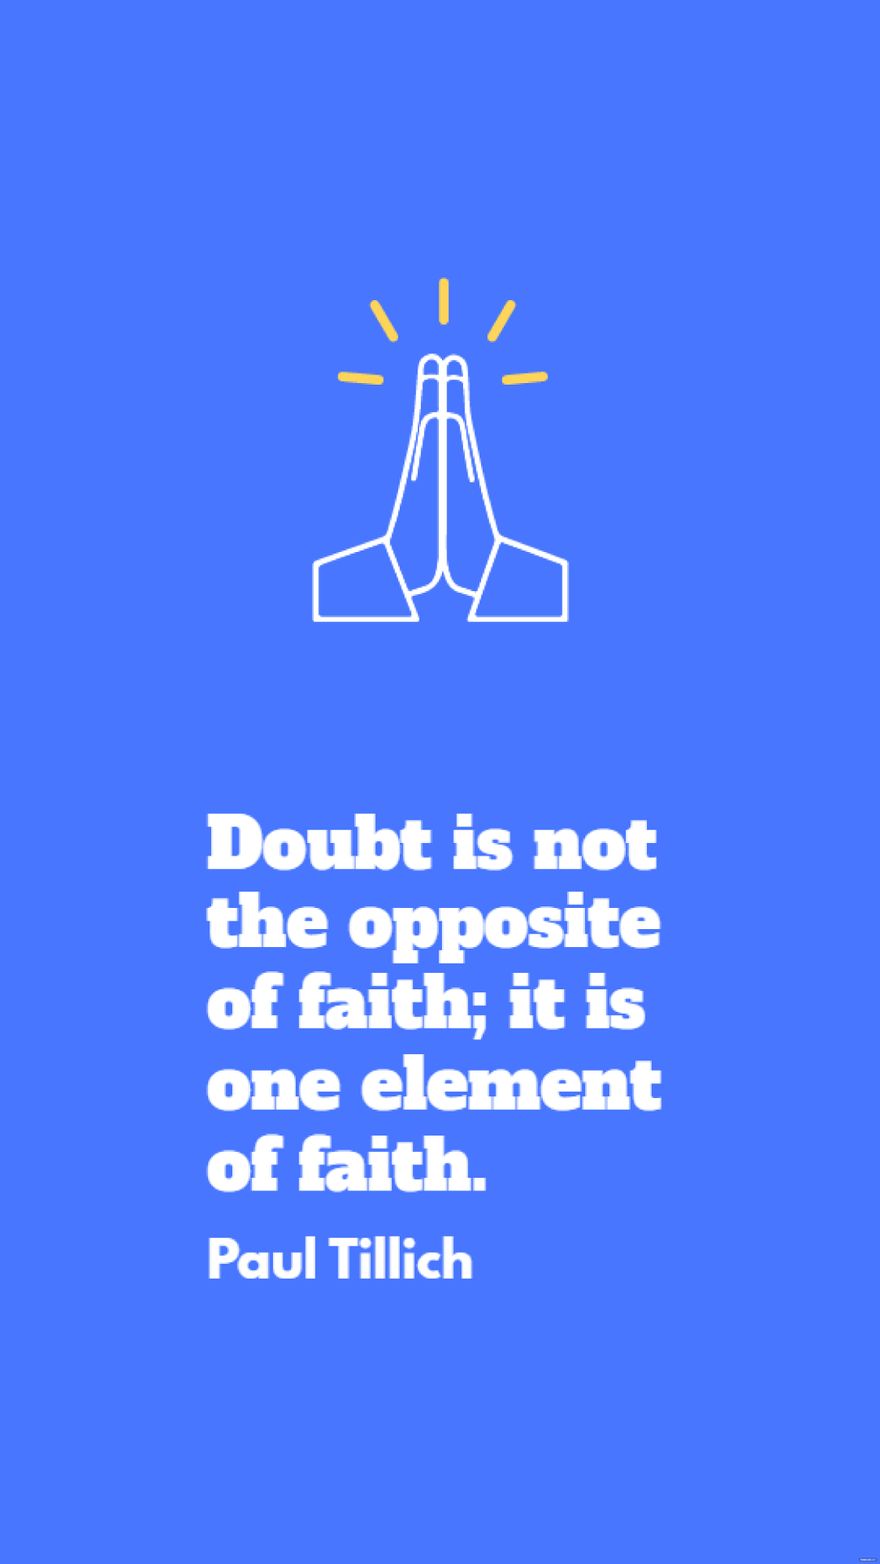 Paul Tillich - Doubt is not the opposite of faith; it is one element of faith.